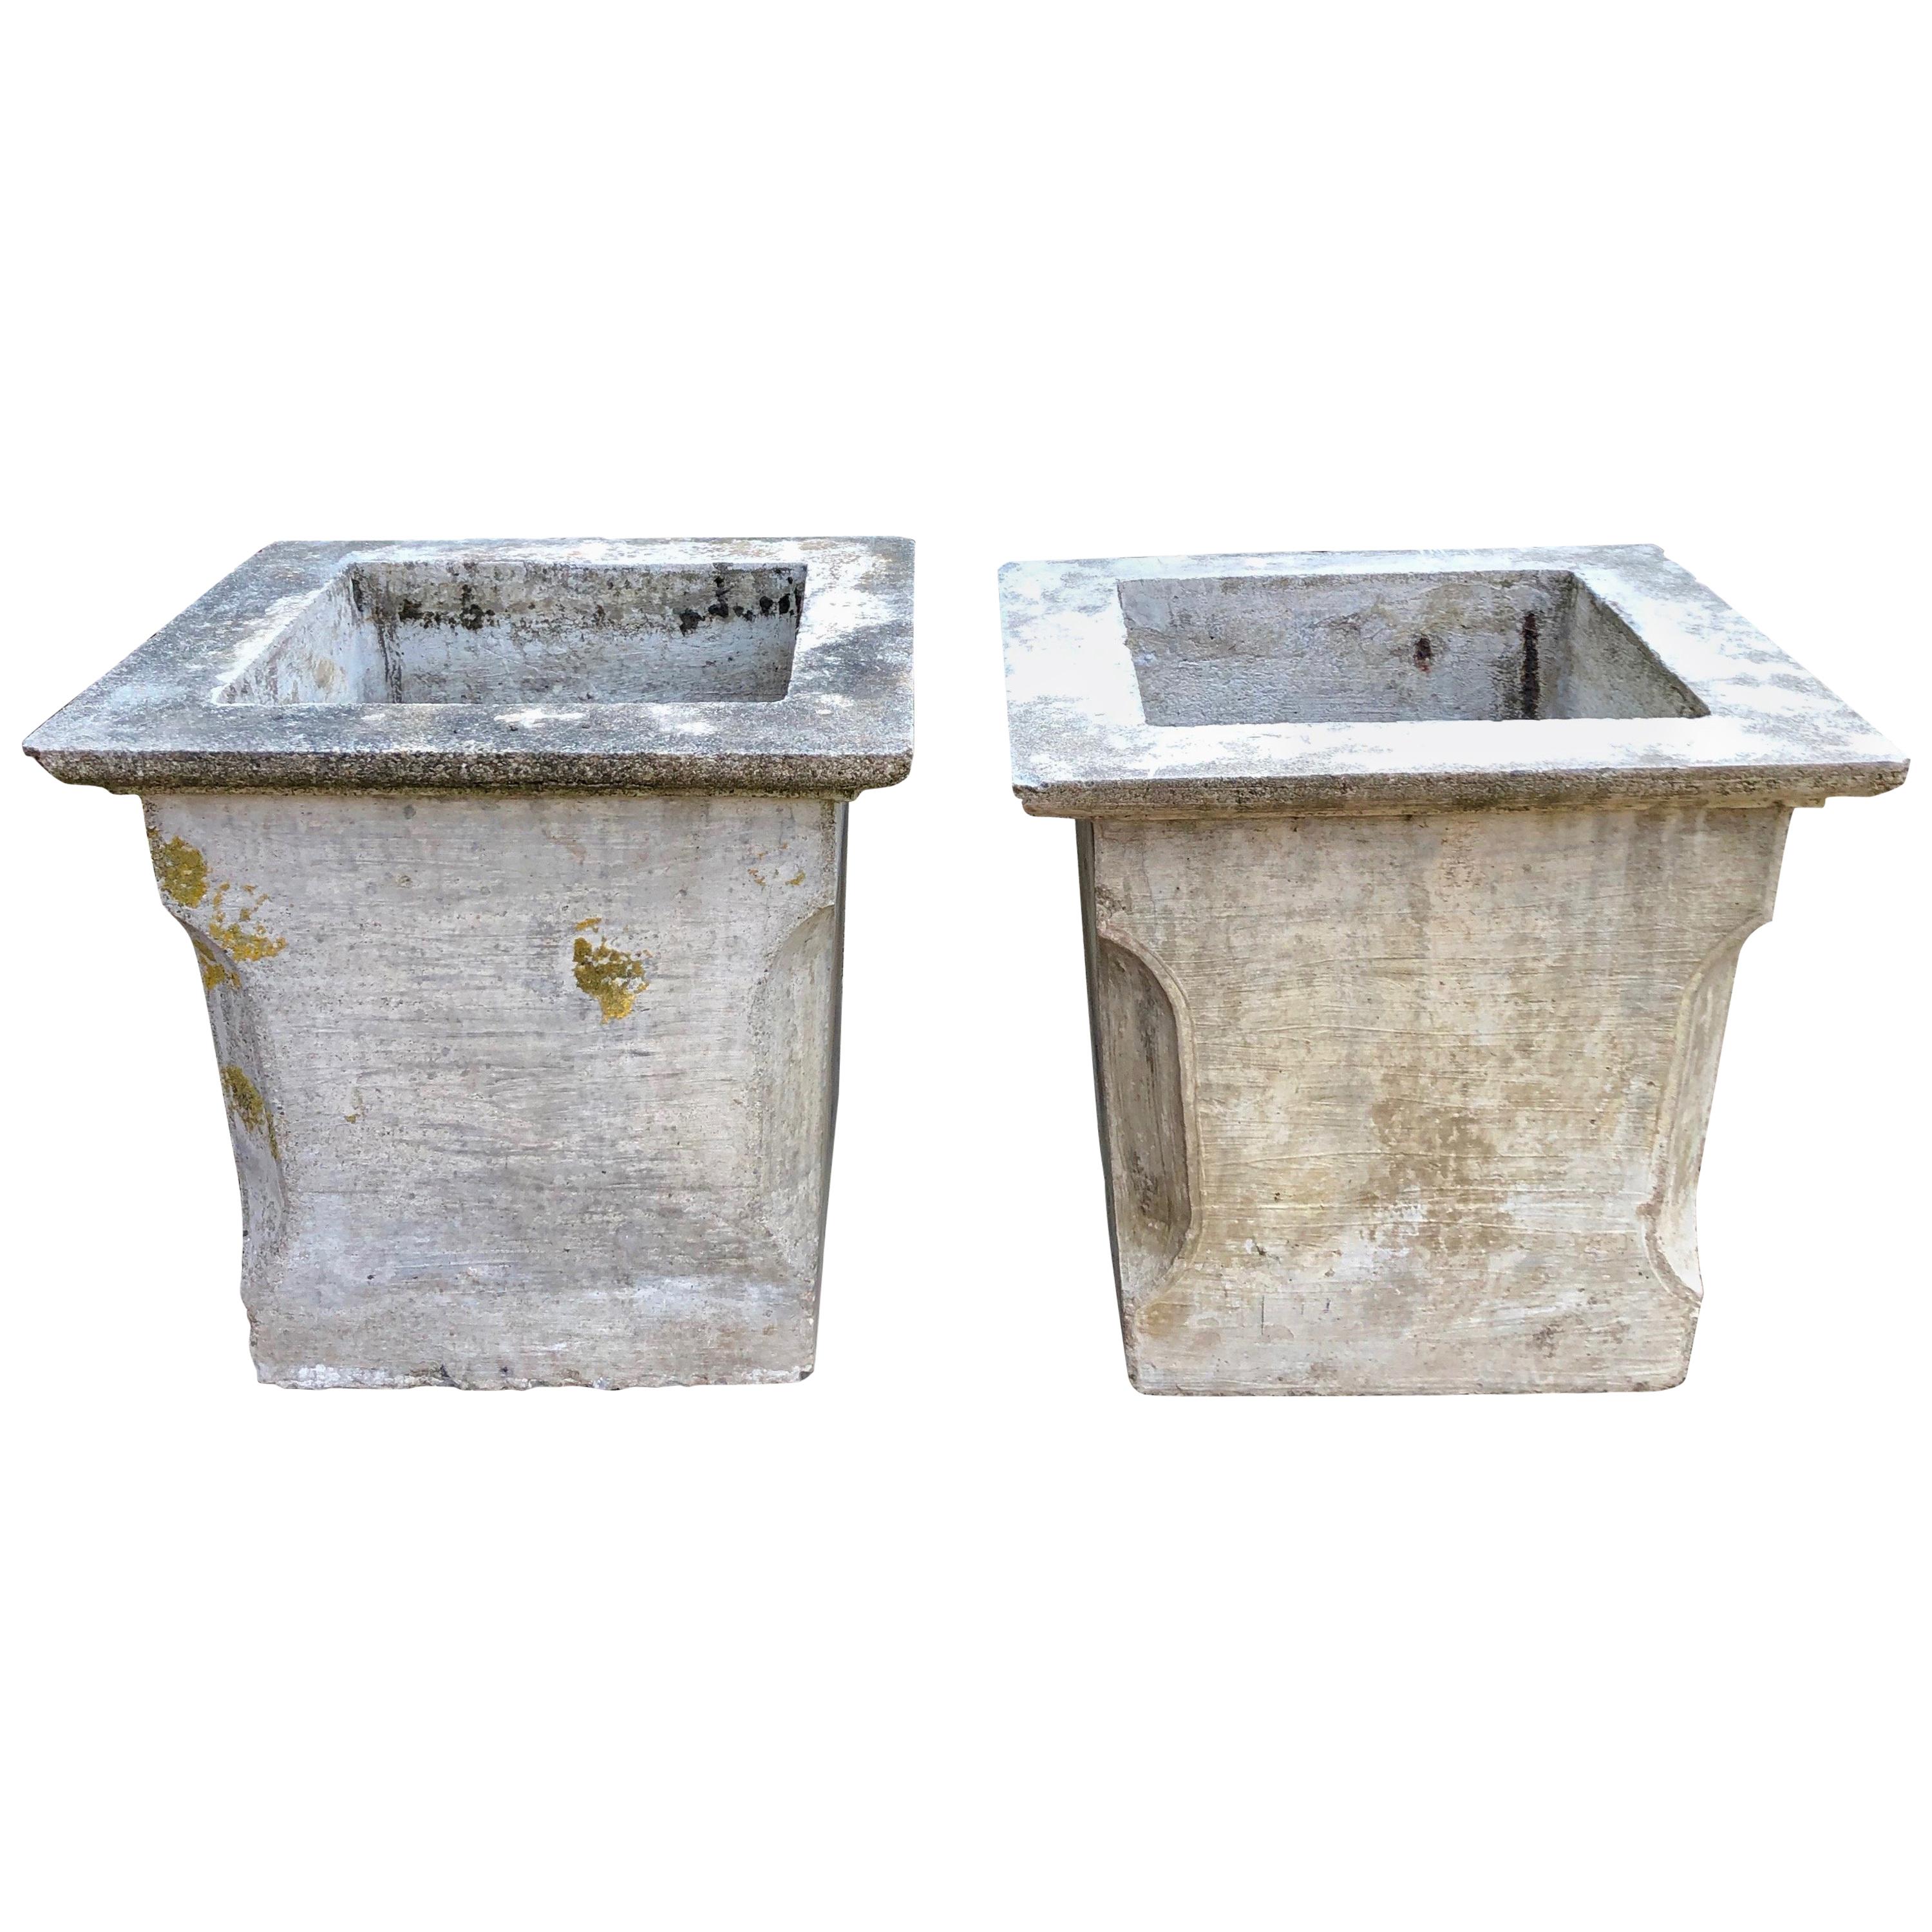 Pair of Large French Mid-Century Modern Square Cast Stone Jardinières